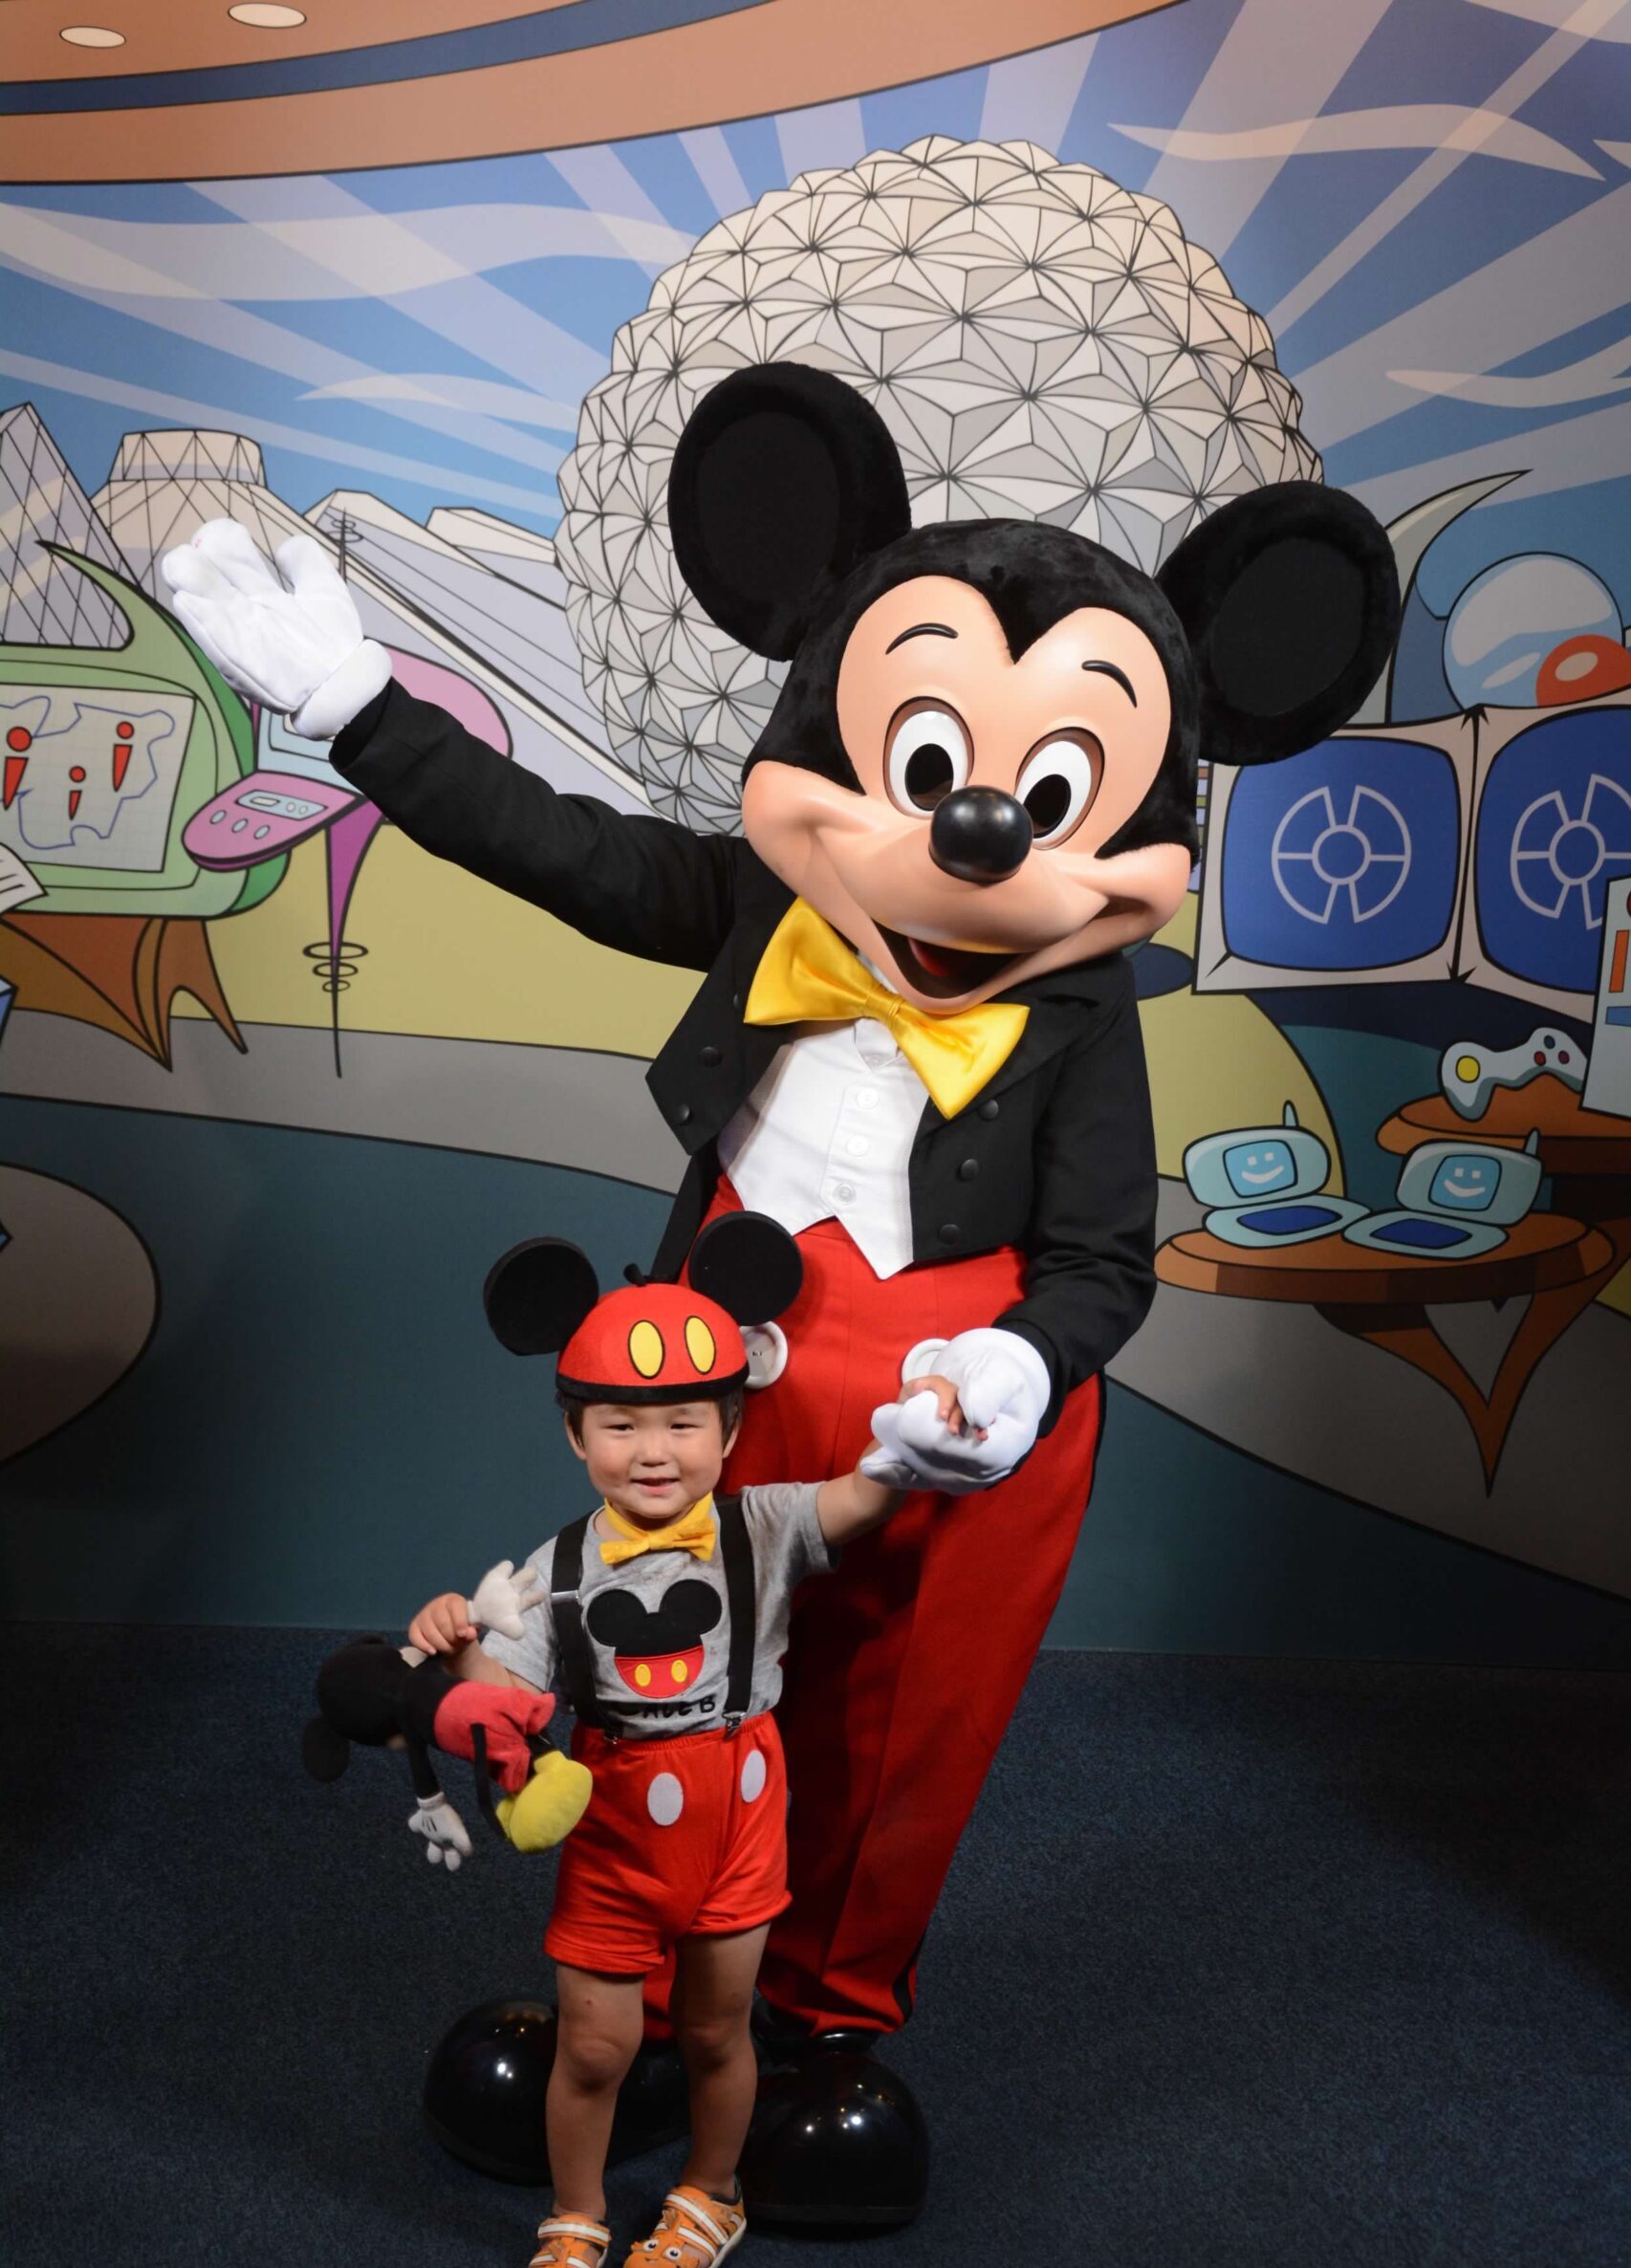 Meeting Mickey mouse at Epcot Character Spot